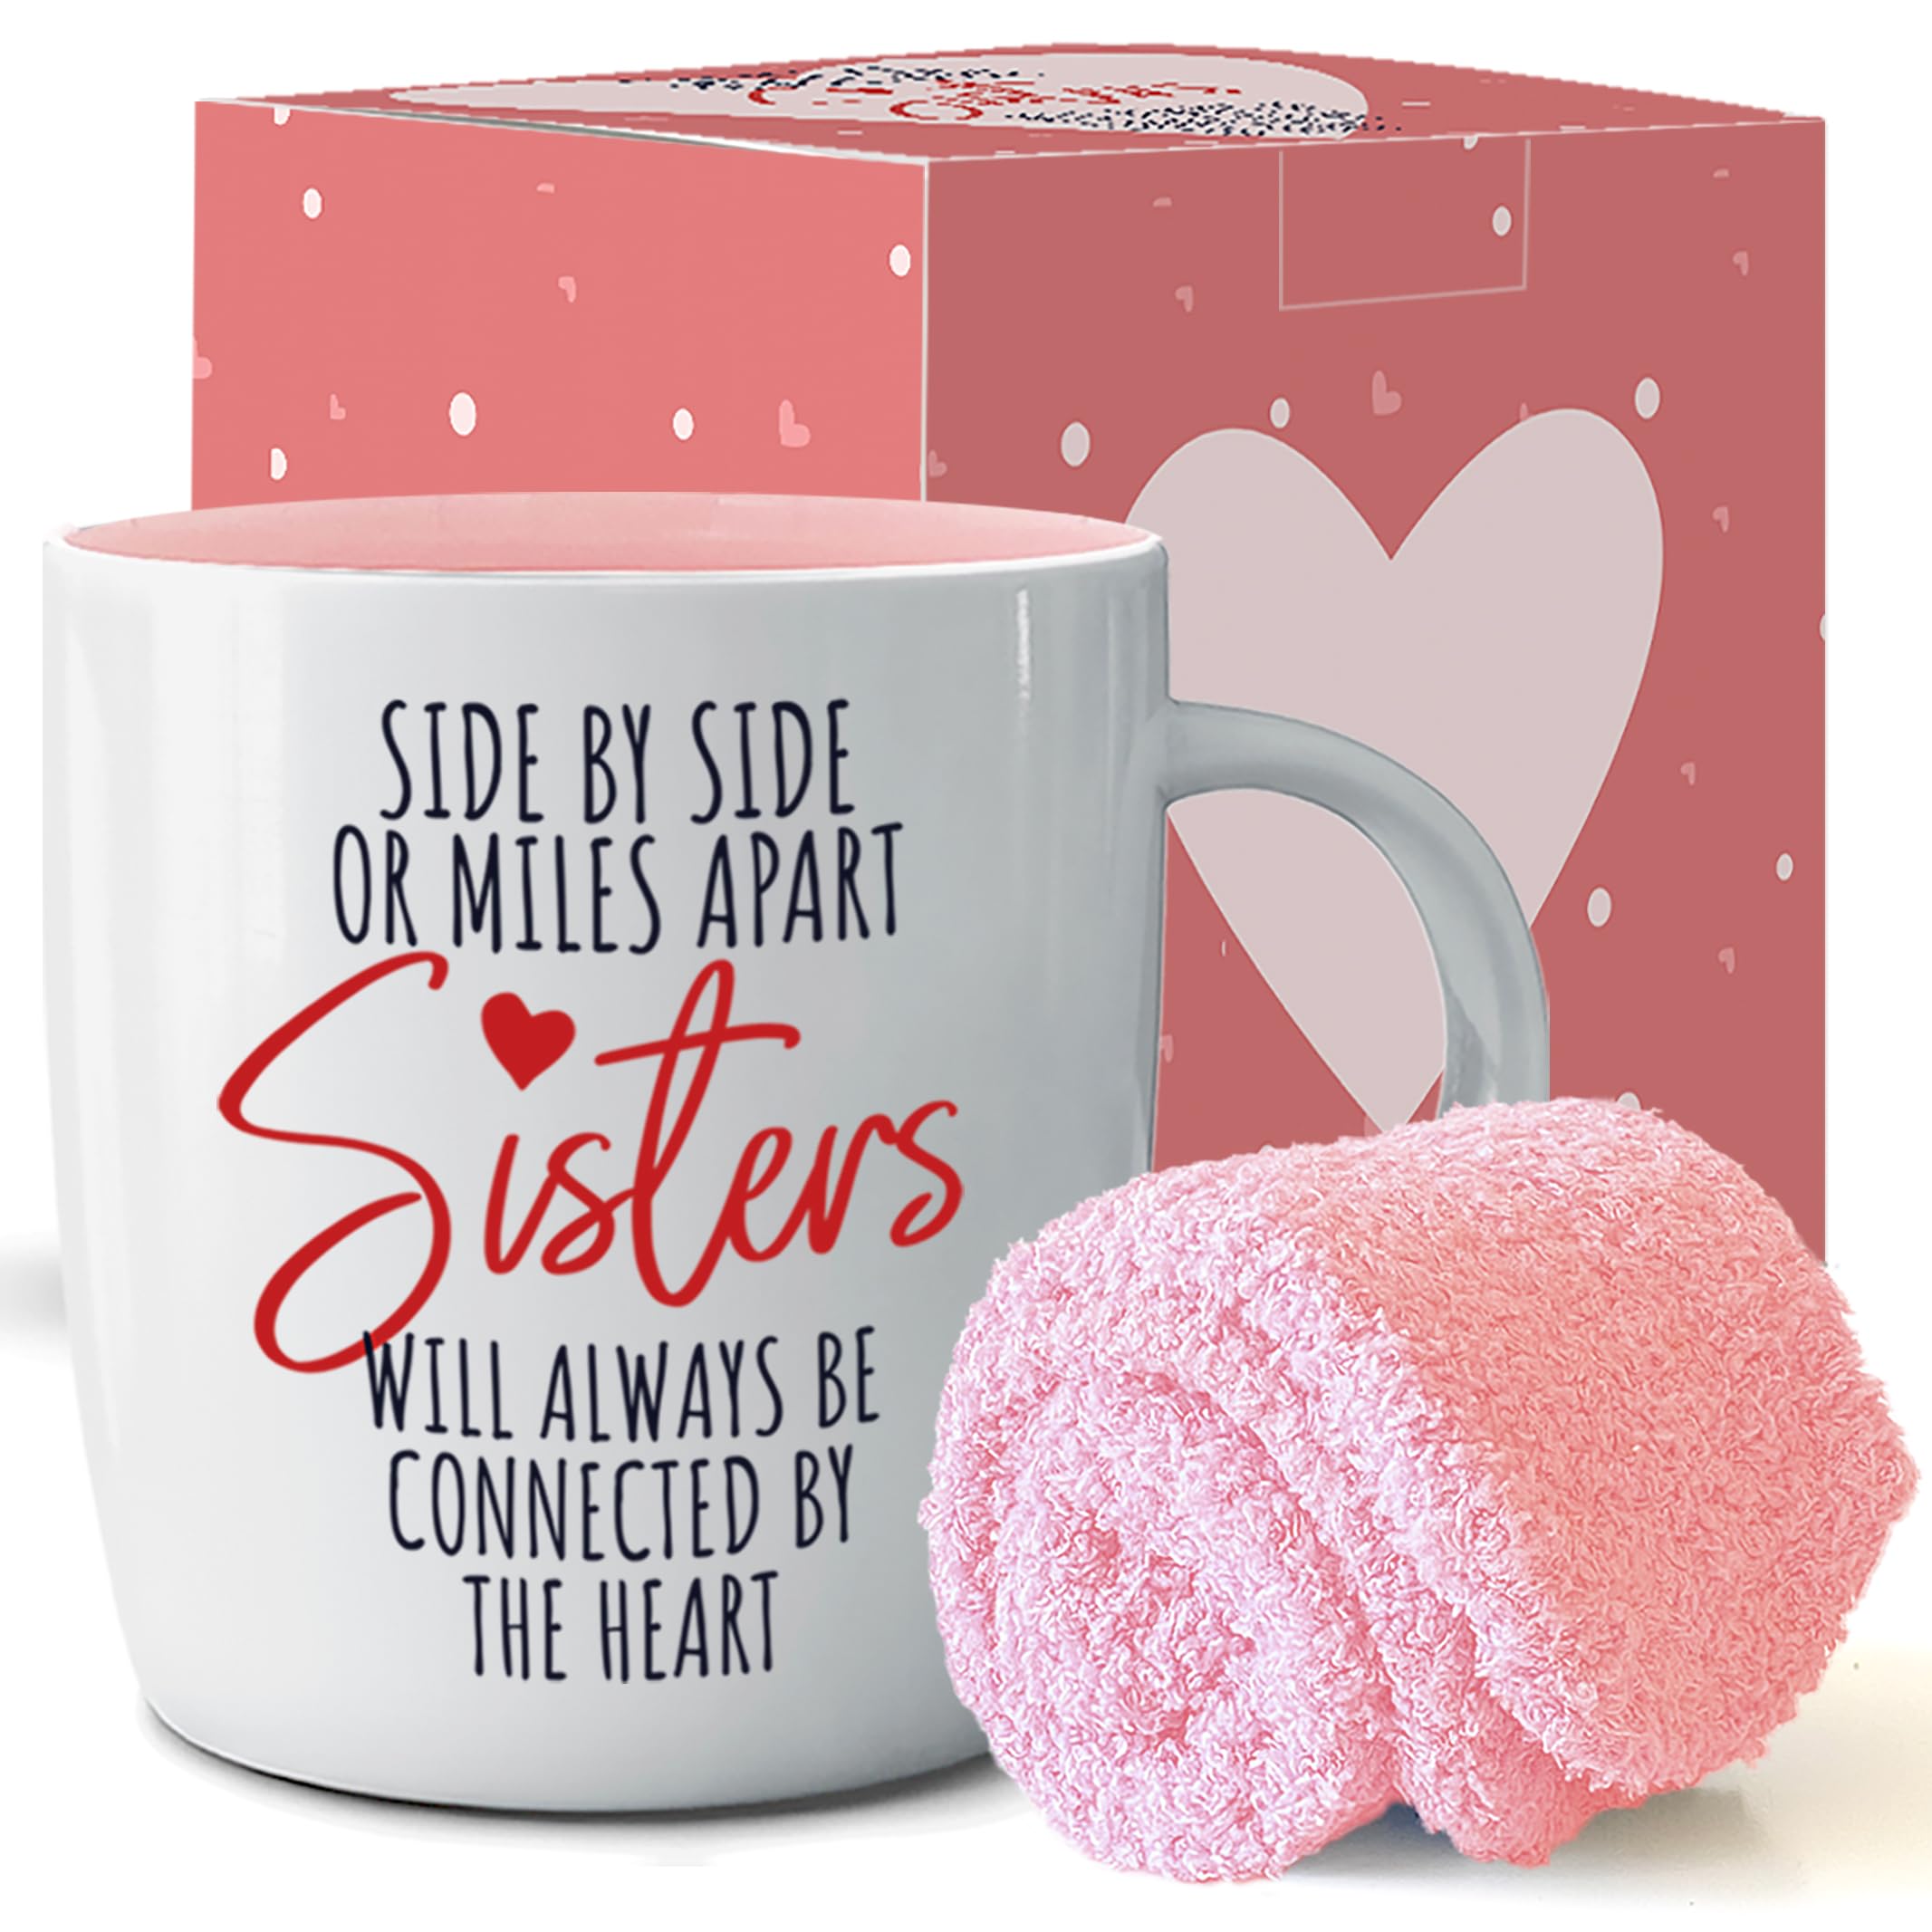 Triple Gifffted Best Sister Ever Coffee Mug & Socks, Gifts for Little Big Sisters from Brother, Birthday Presents Ideas, Valentines Mothers Day Christmas, to younger older sibling, Ceramic Cup 380ML